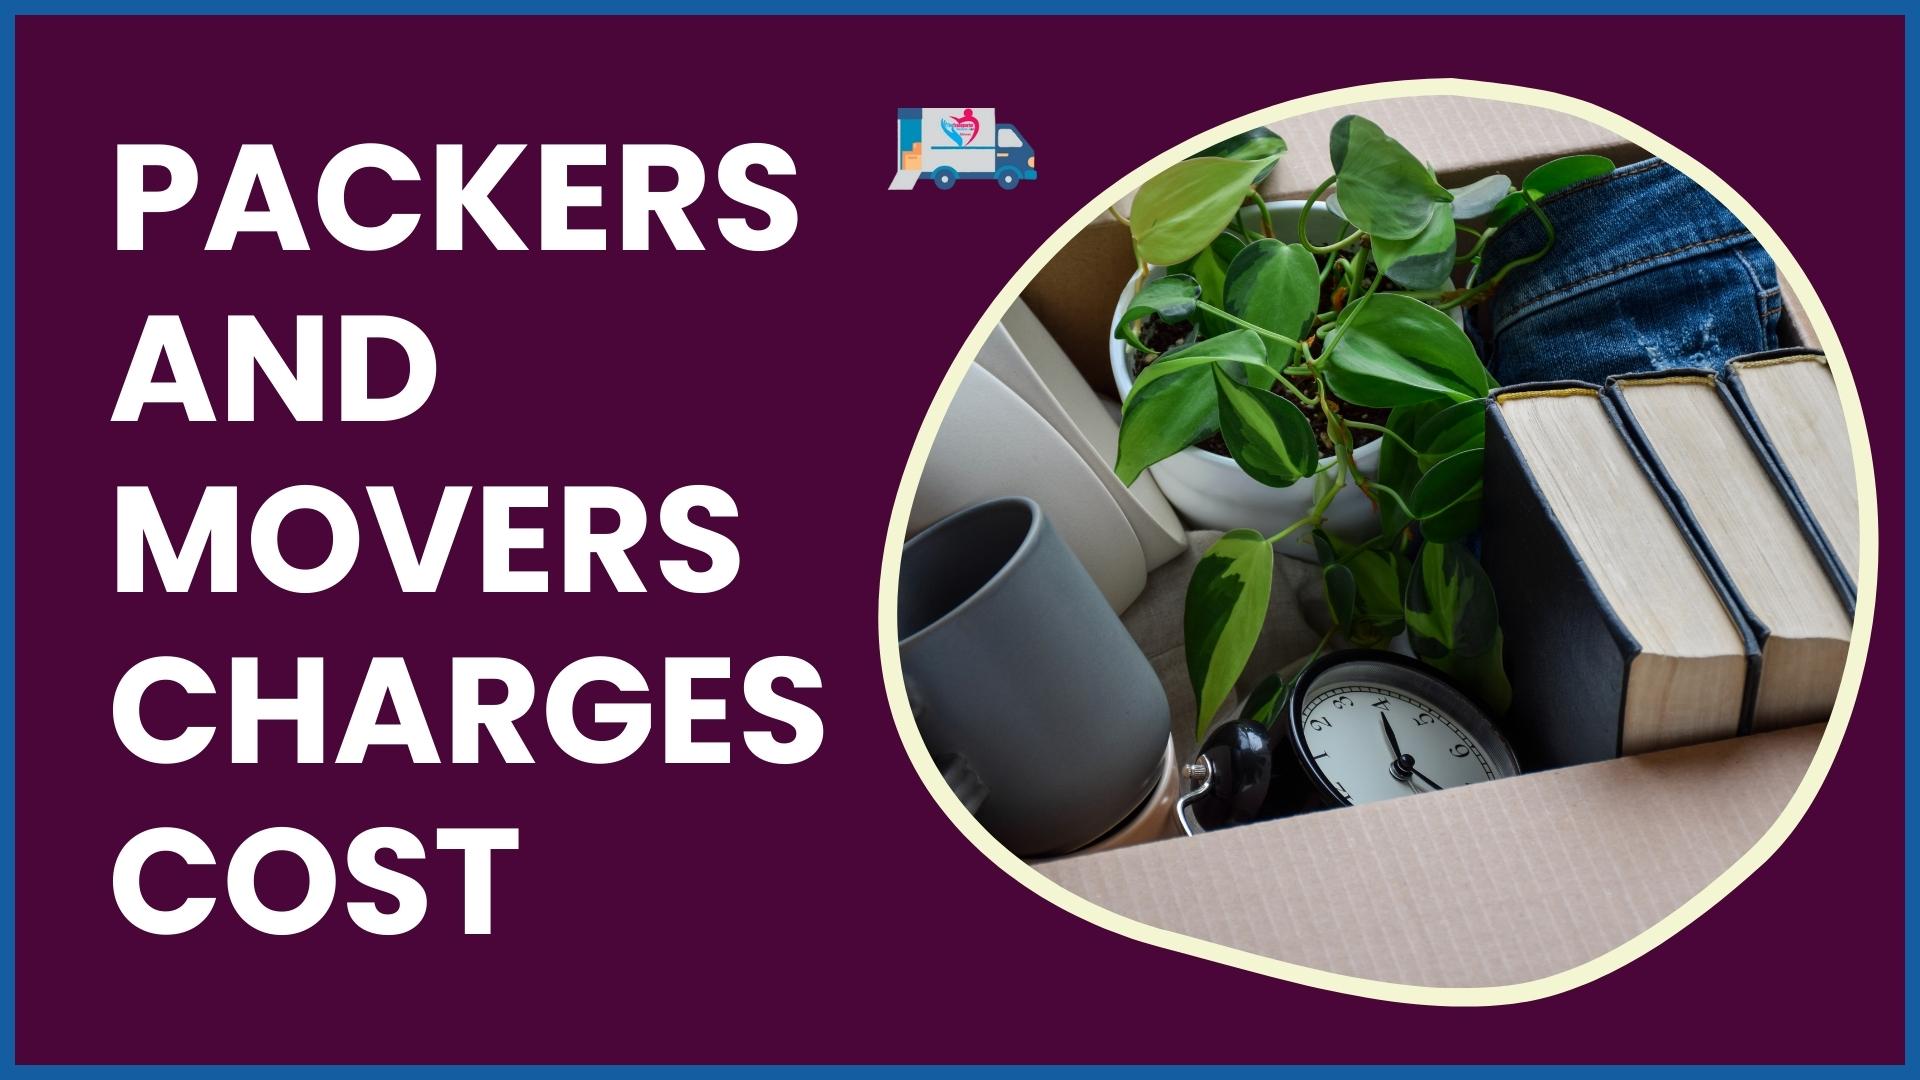 Packers and Movers offers competitive movers and packers Udaipur rates and excellent services